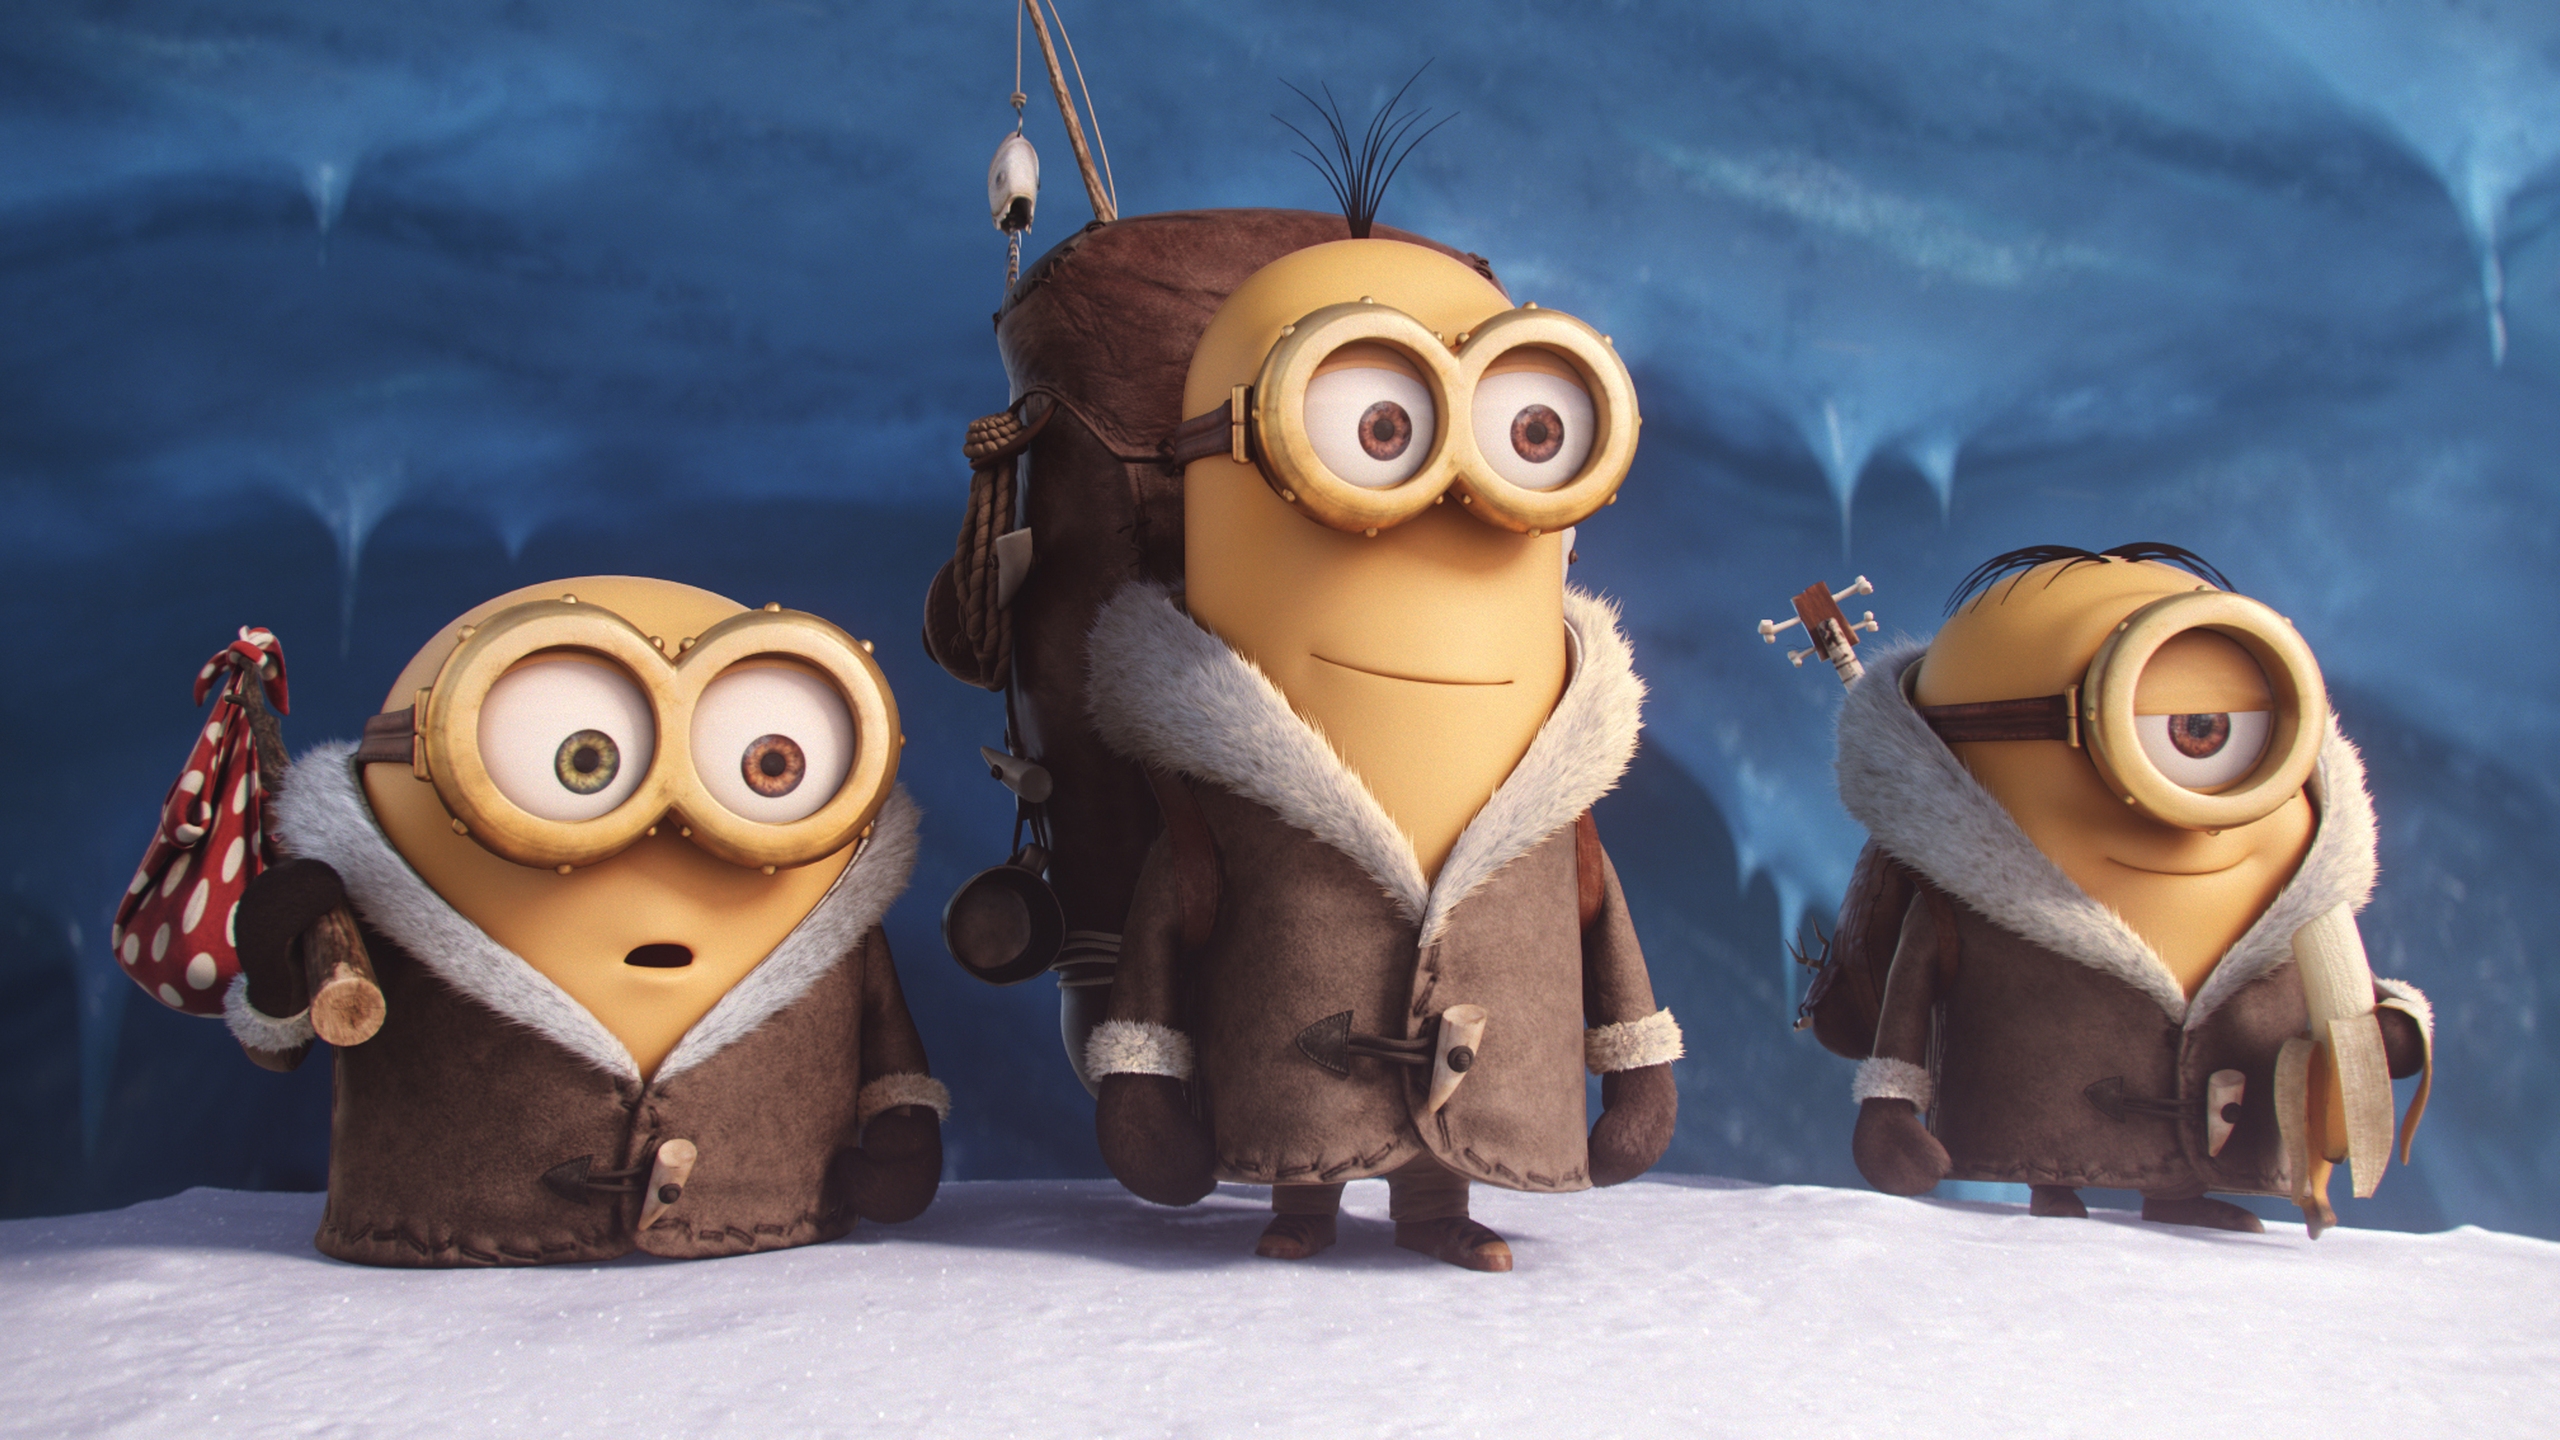 Minions Movie for 2560x1440 HDTV resolution